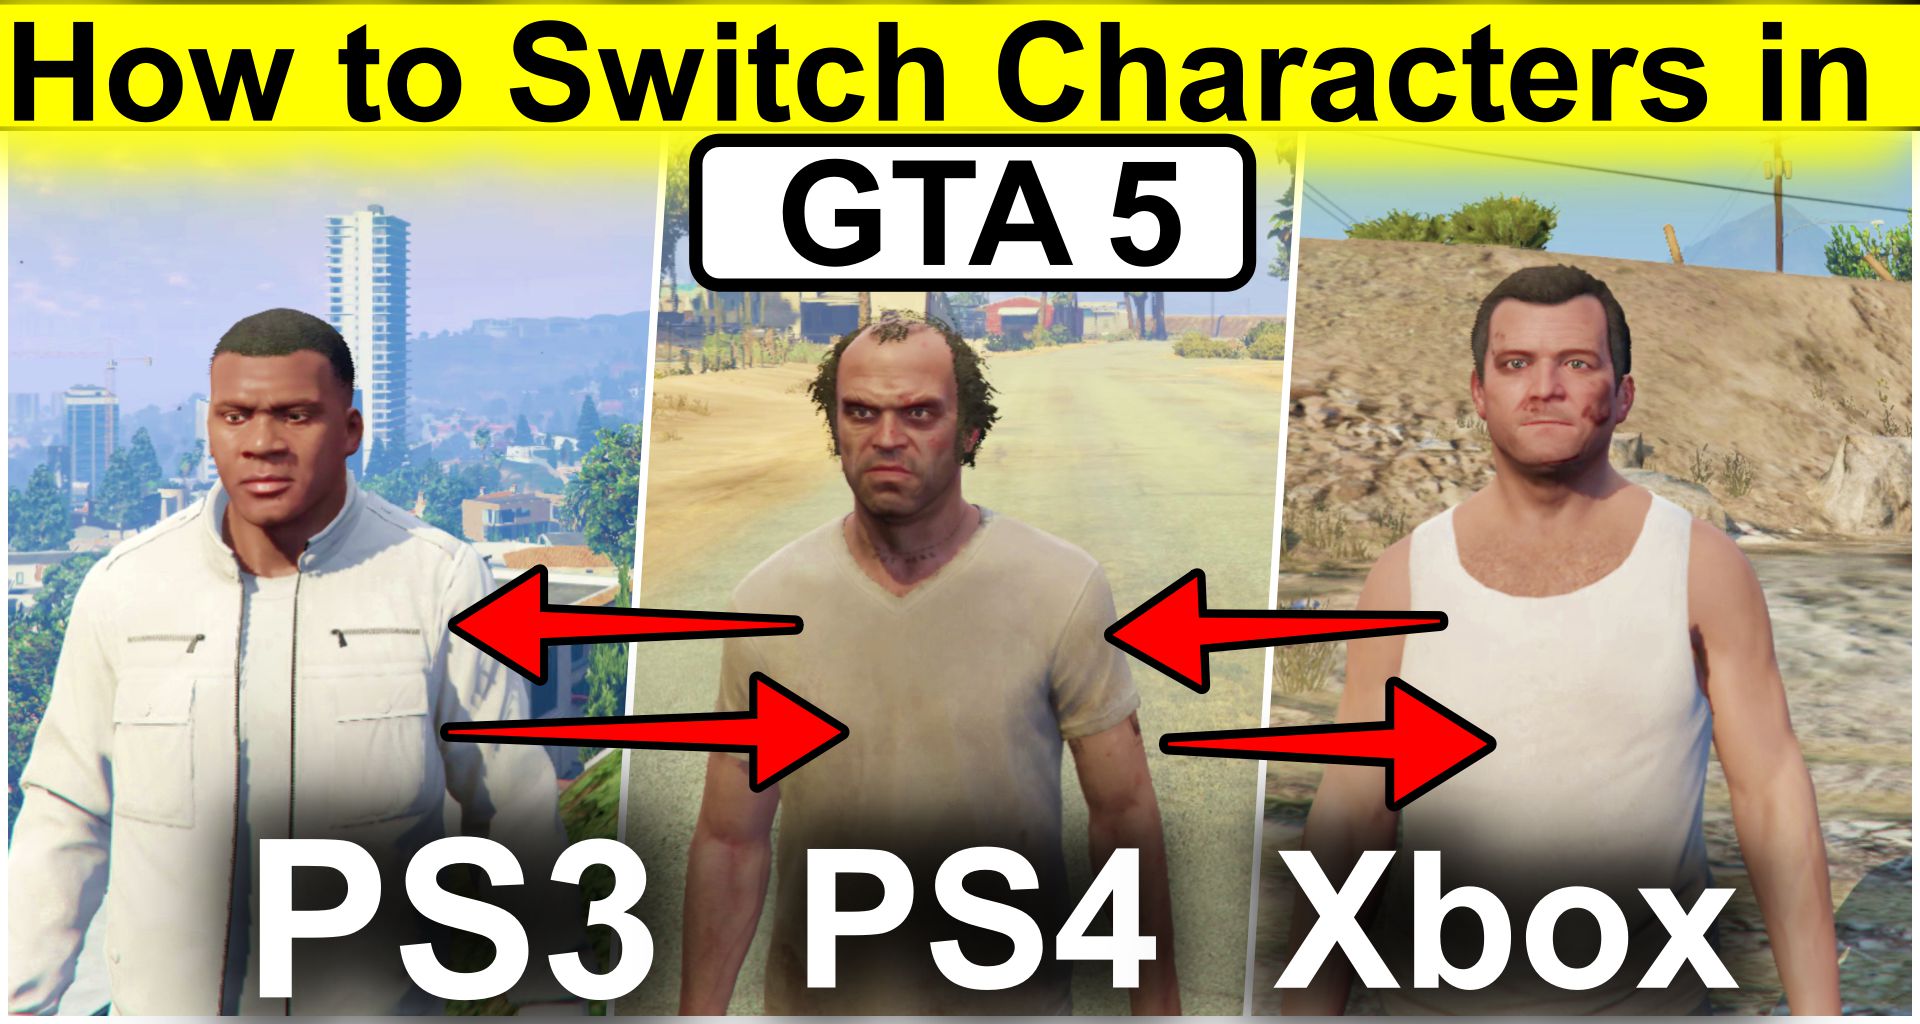 How to Switch Characters in GTA 5 PS3, PS4, Xbox